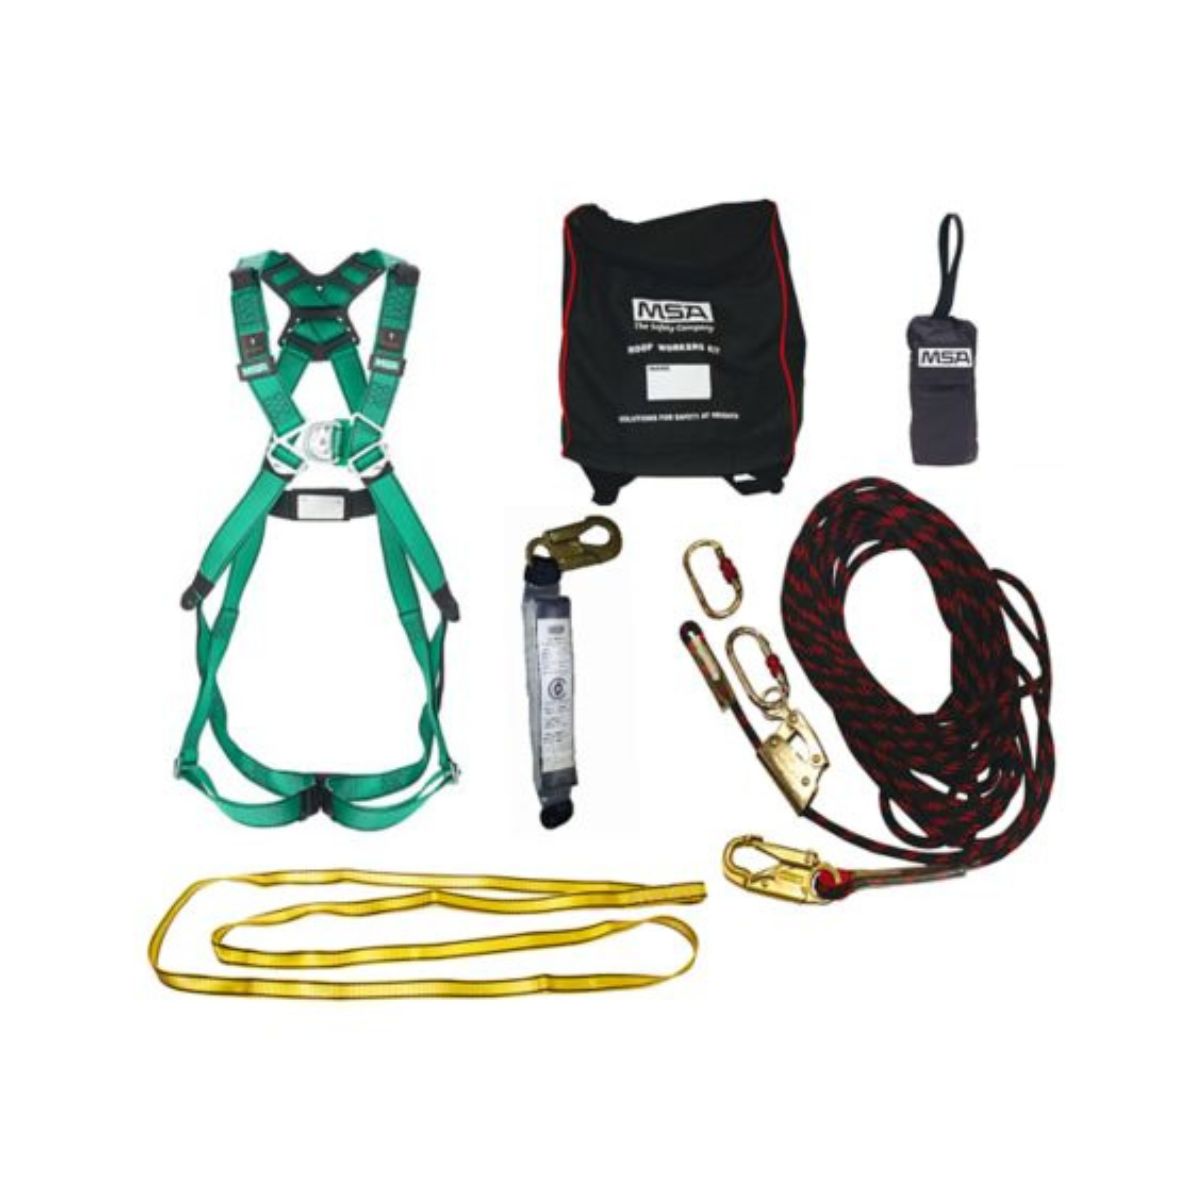 MSA Roof Workers Kit with V-FORM Harness, Kernmantle Rope